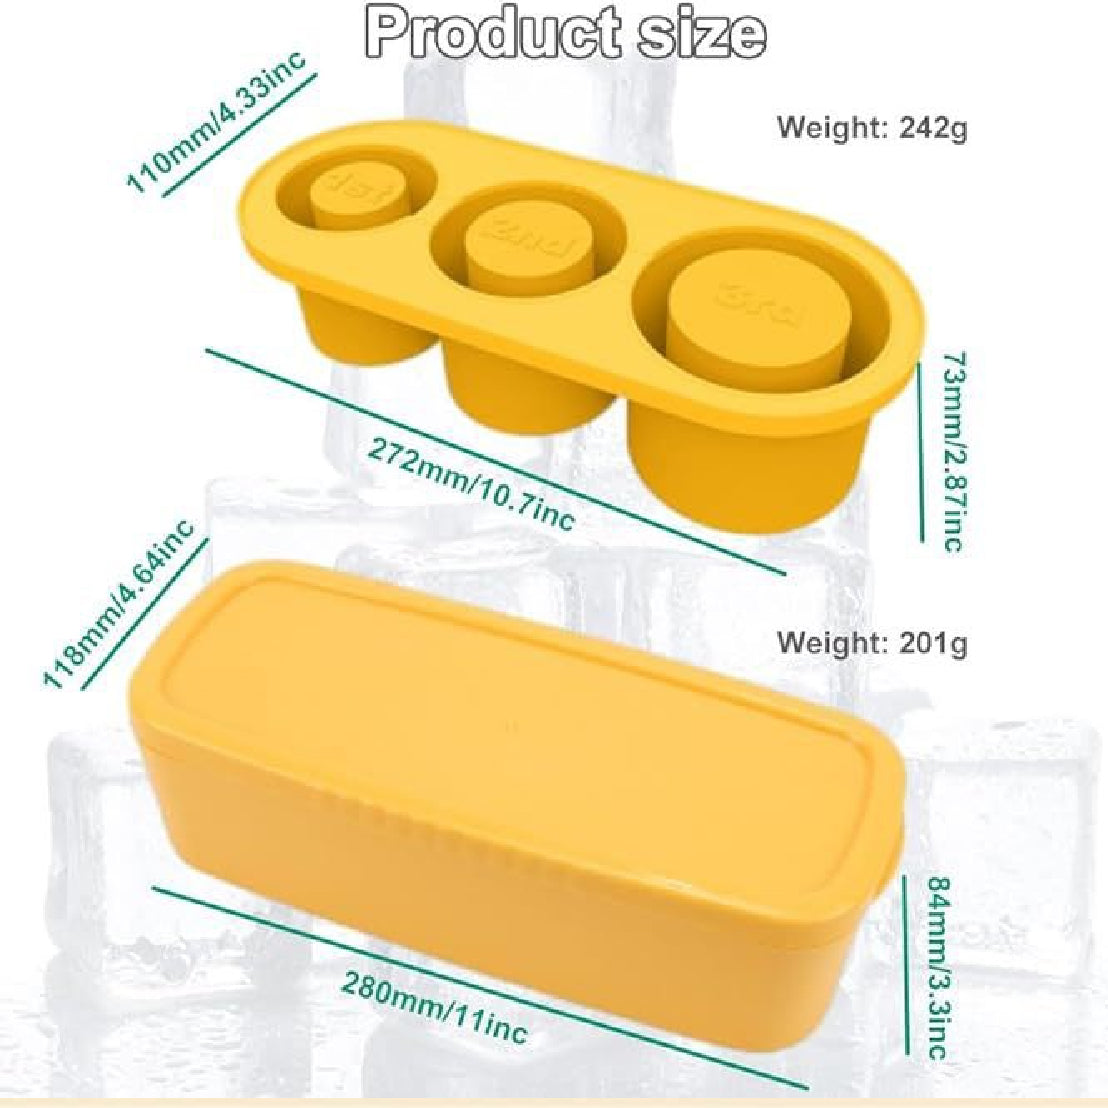 Large Capacity Ice Cube Tray, 11 x 4.64 x 3.3 Inches, 3-Piece Silicone Ice Cube Mold with Lid and Box, for Whiskey Cocktails, Juice Freezing